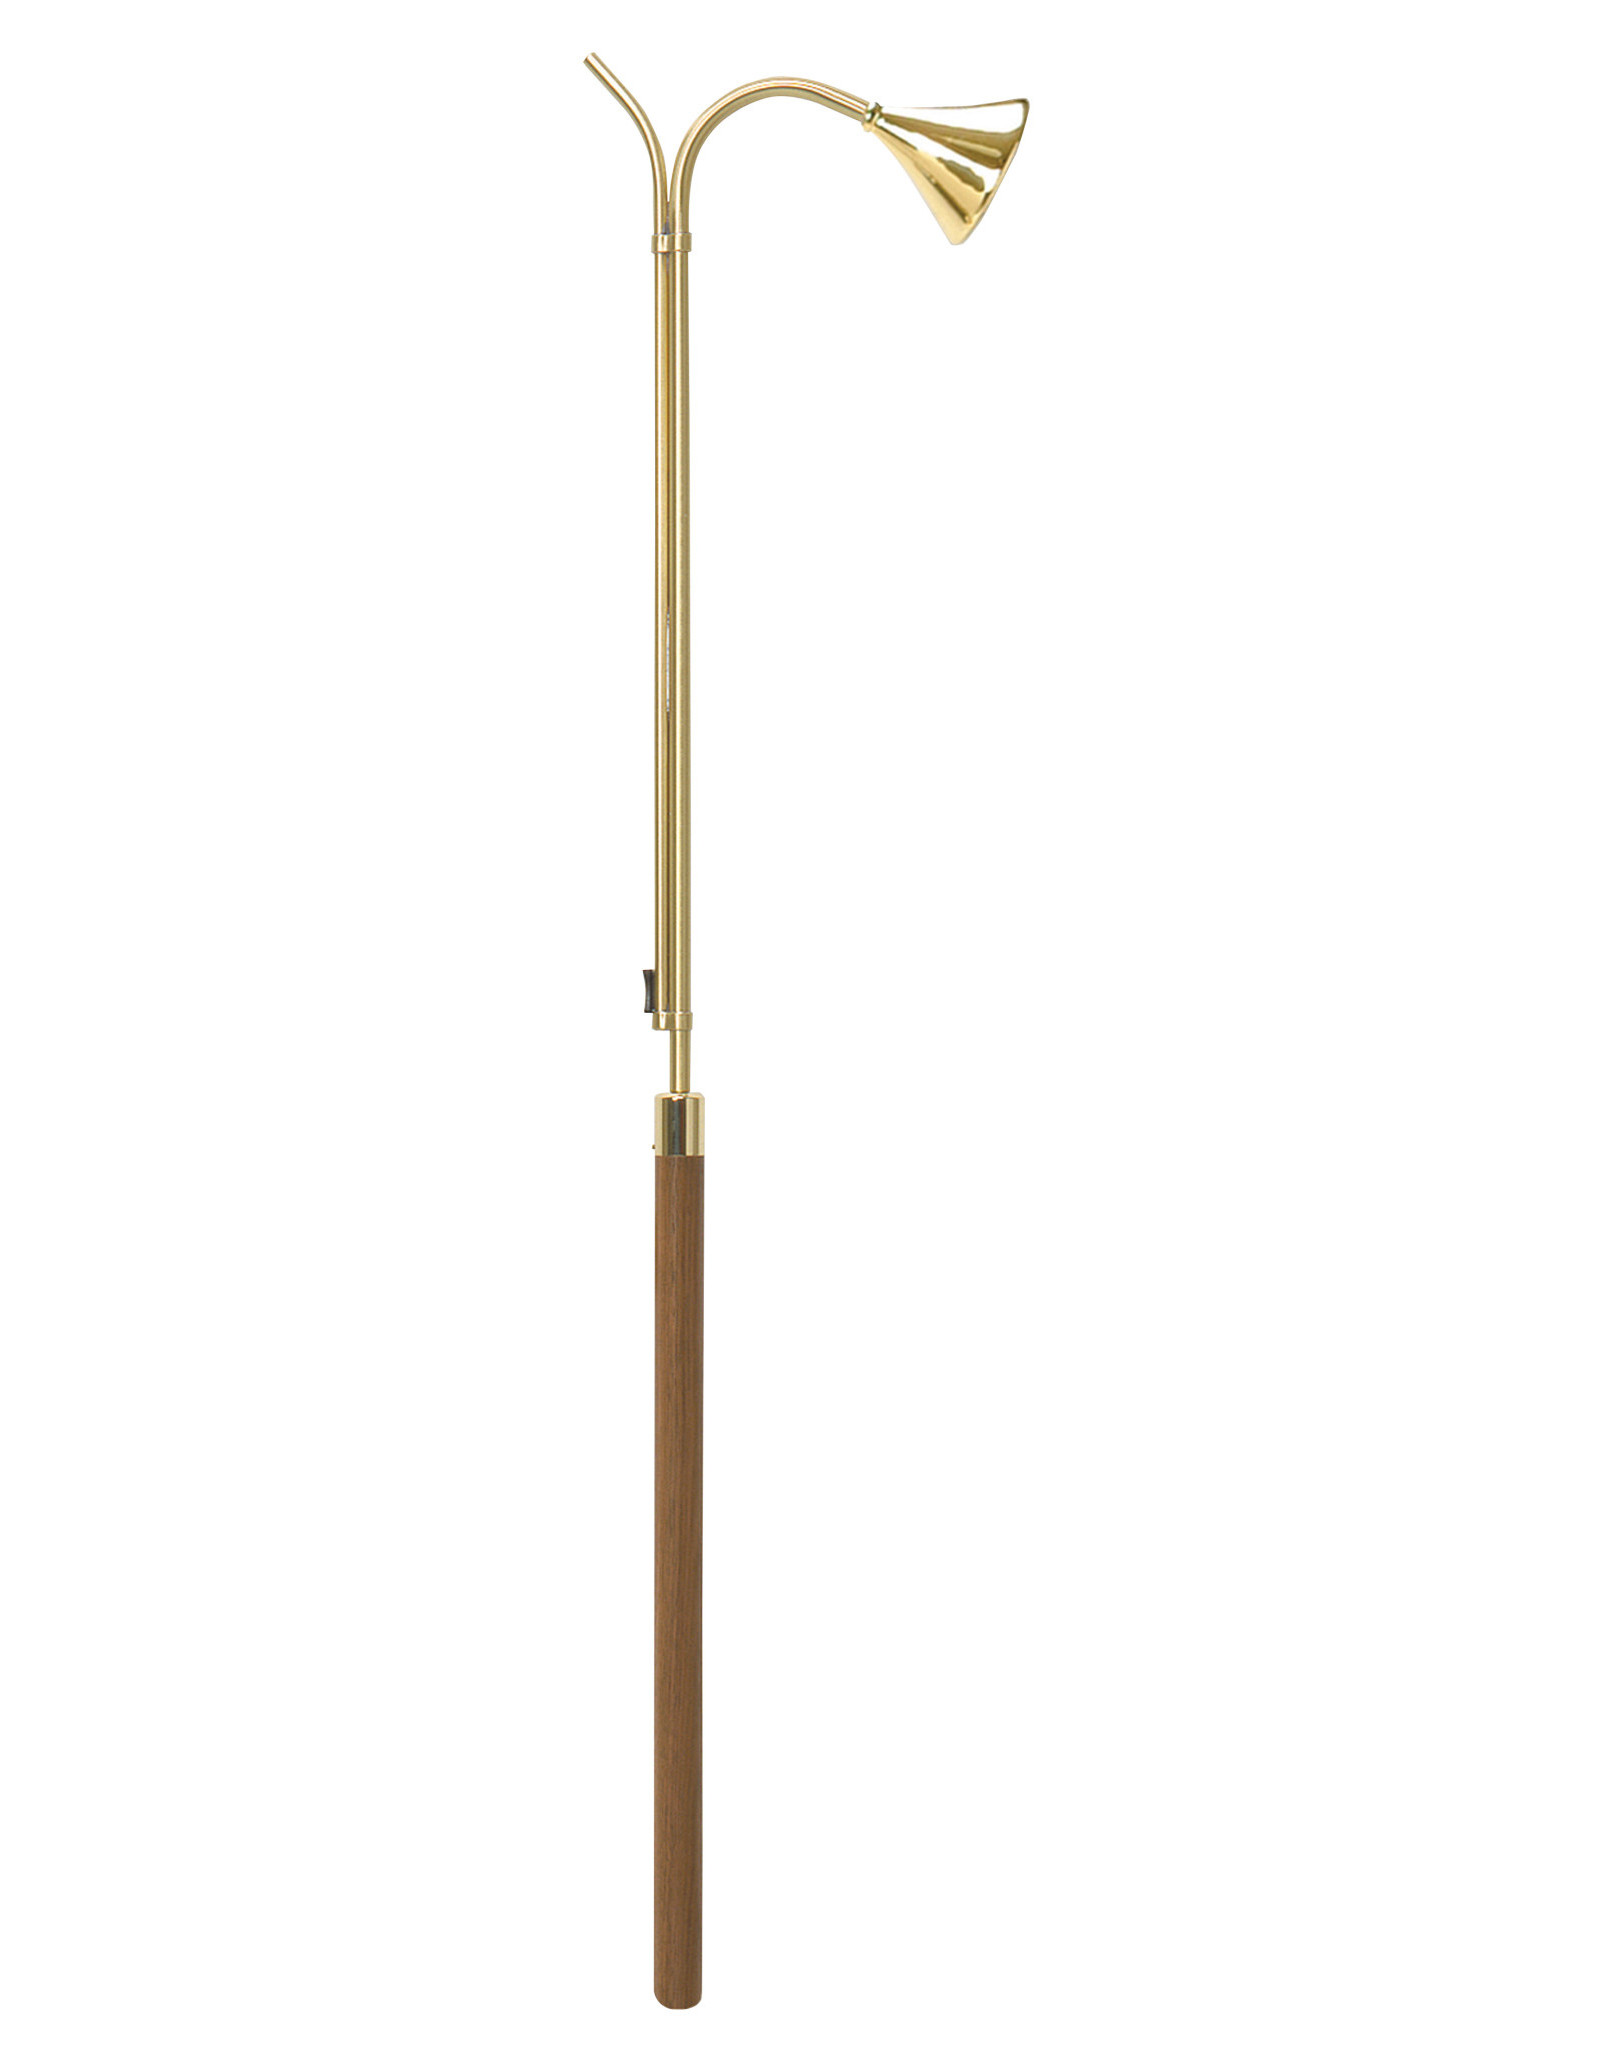 Candlelighter - Solid Brass with Walnut Handle -